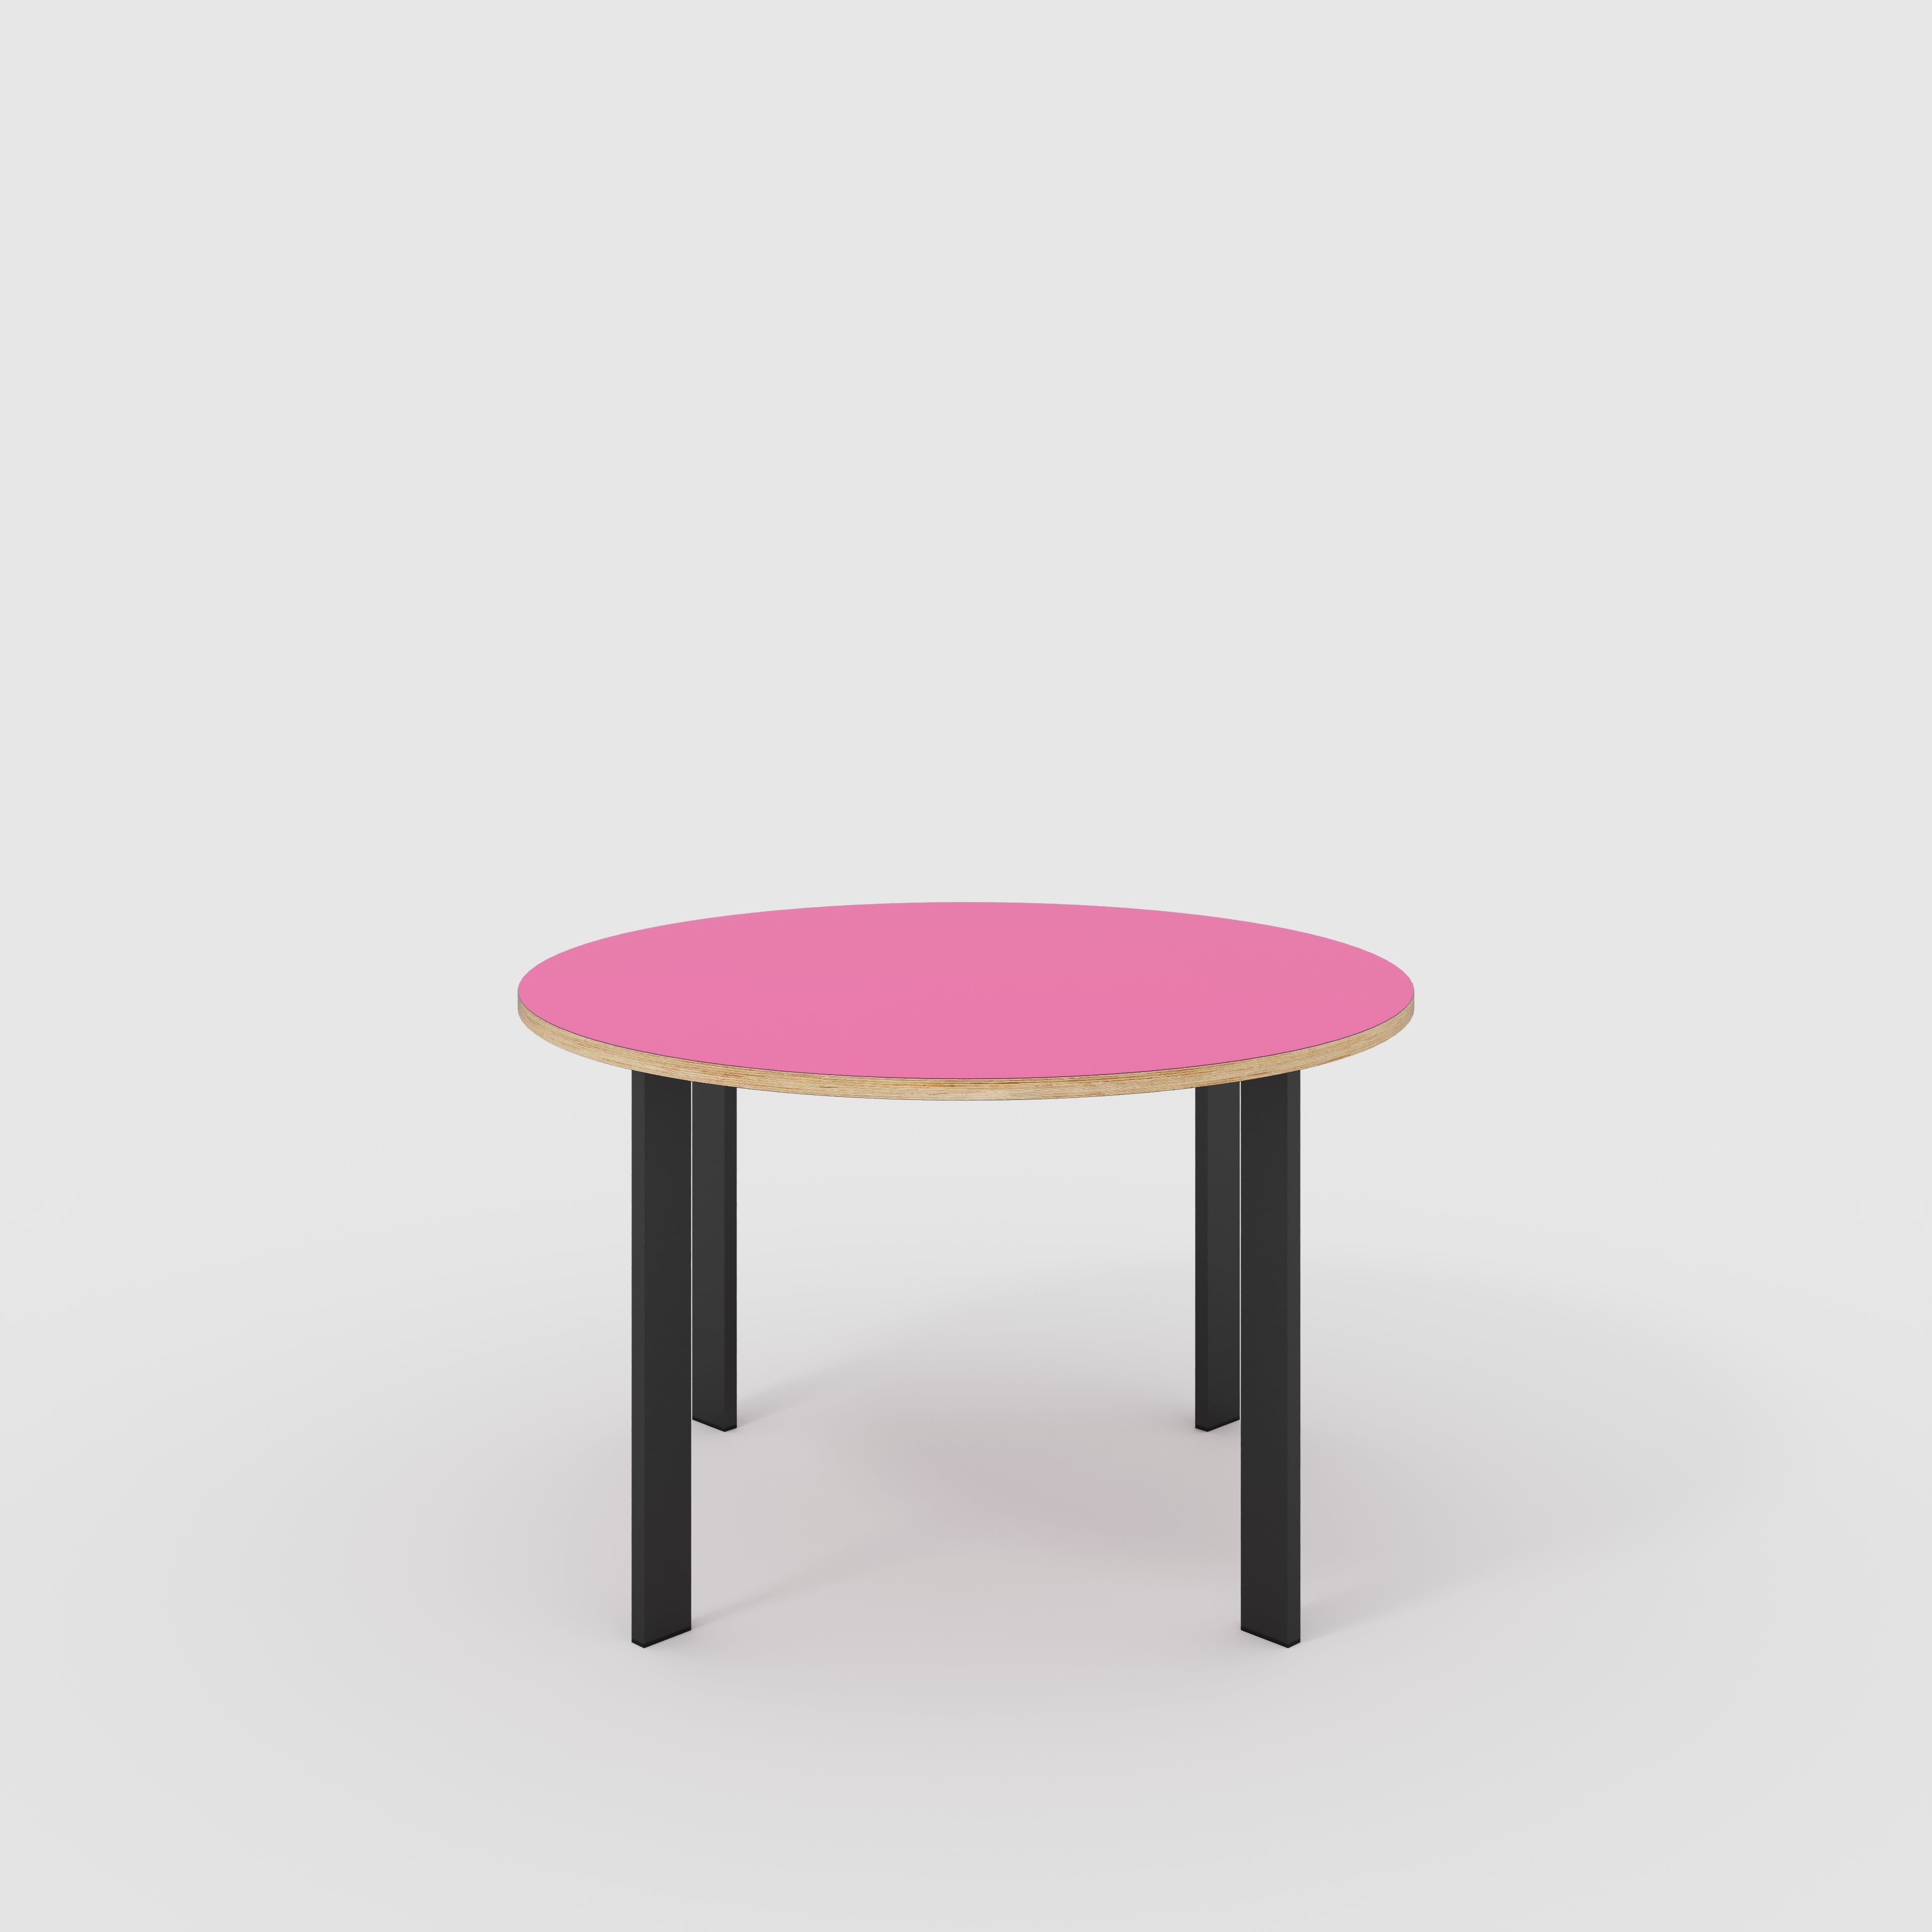 Round Table with Black Rectangular Single Pin Legs - Formica Juicy Pink - 1200(dia) x 735(h)